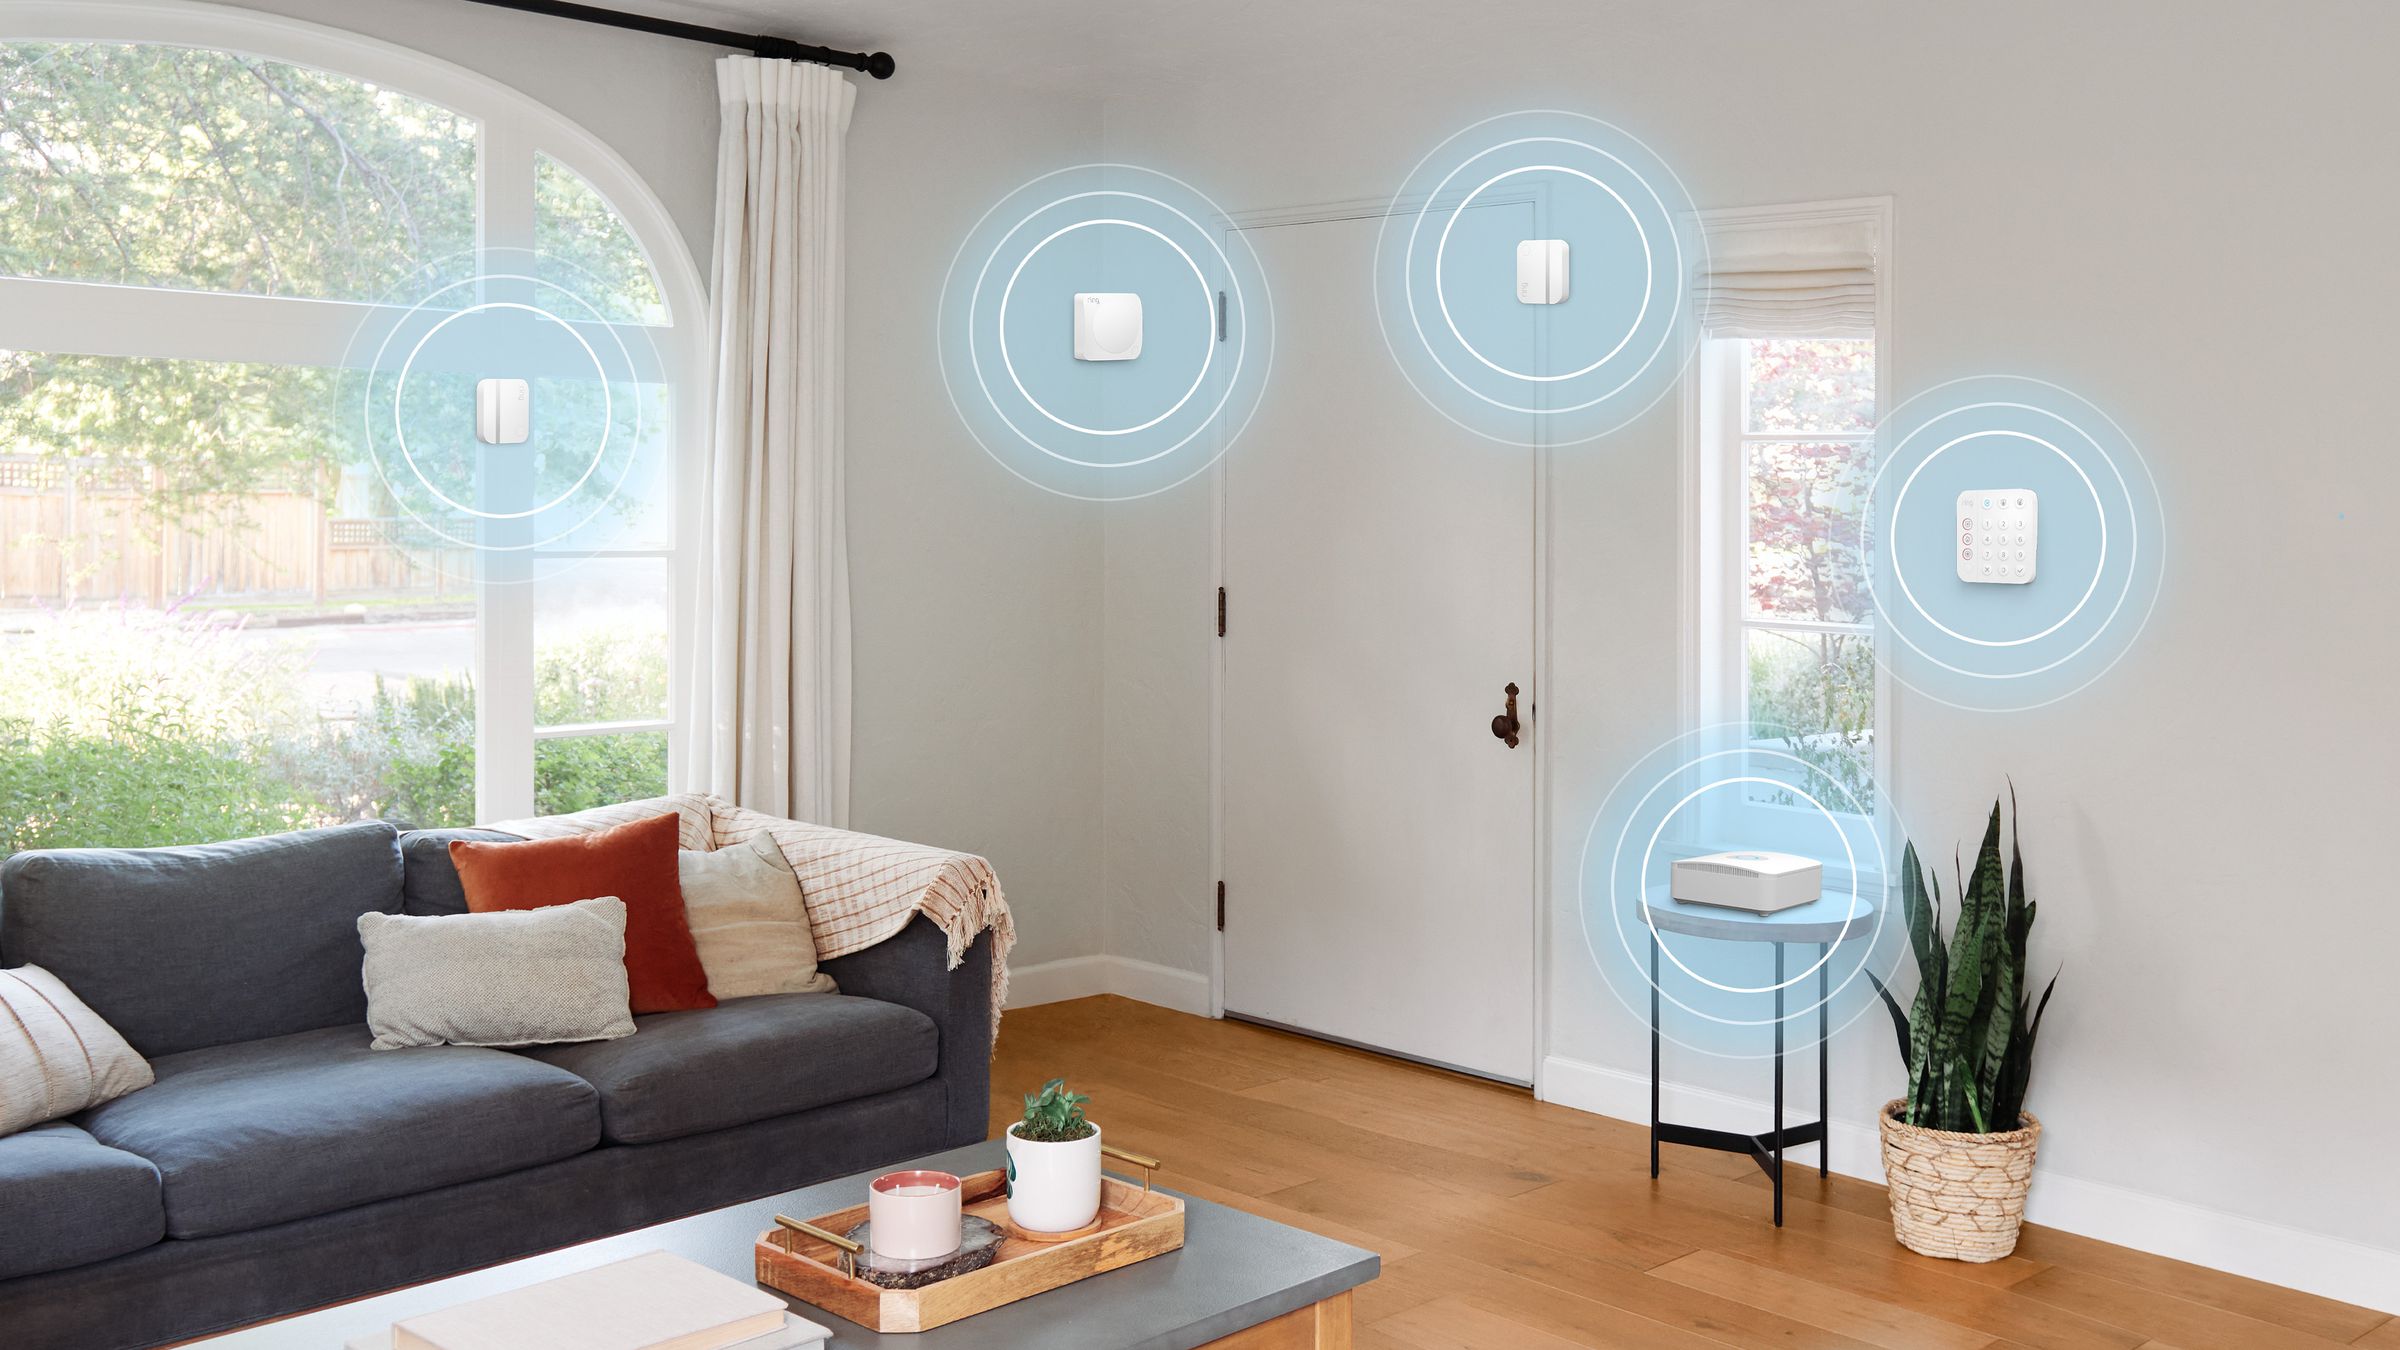 The Ring Alarm Pro base station connects to Z-wave security sensors in your home.  